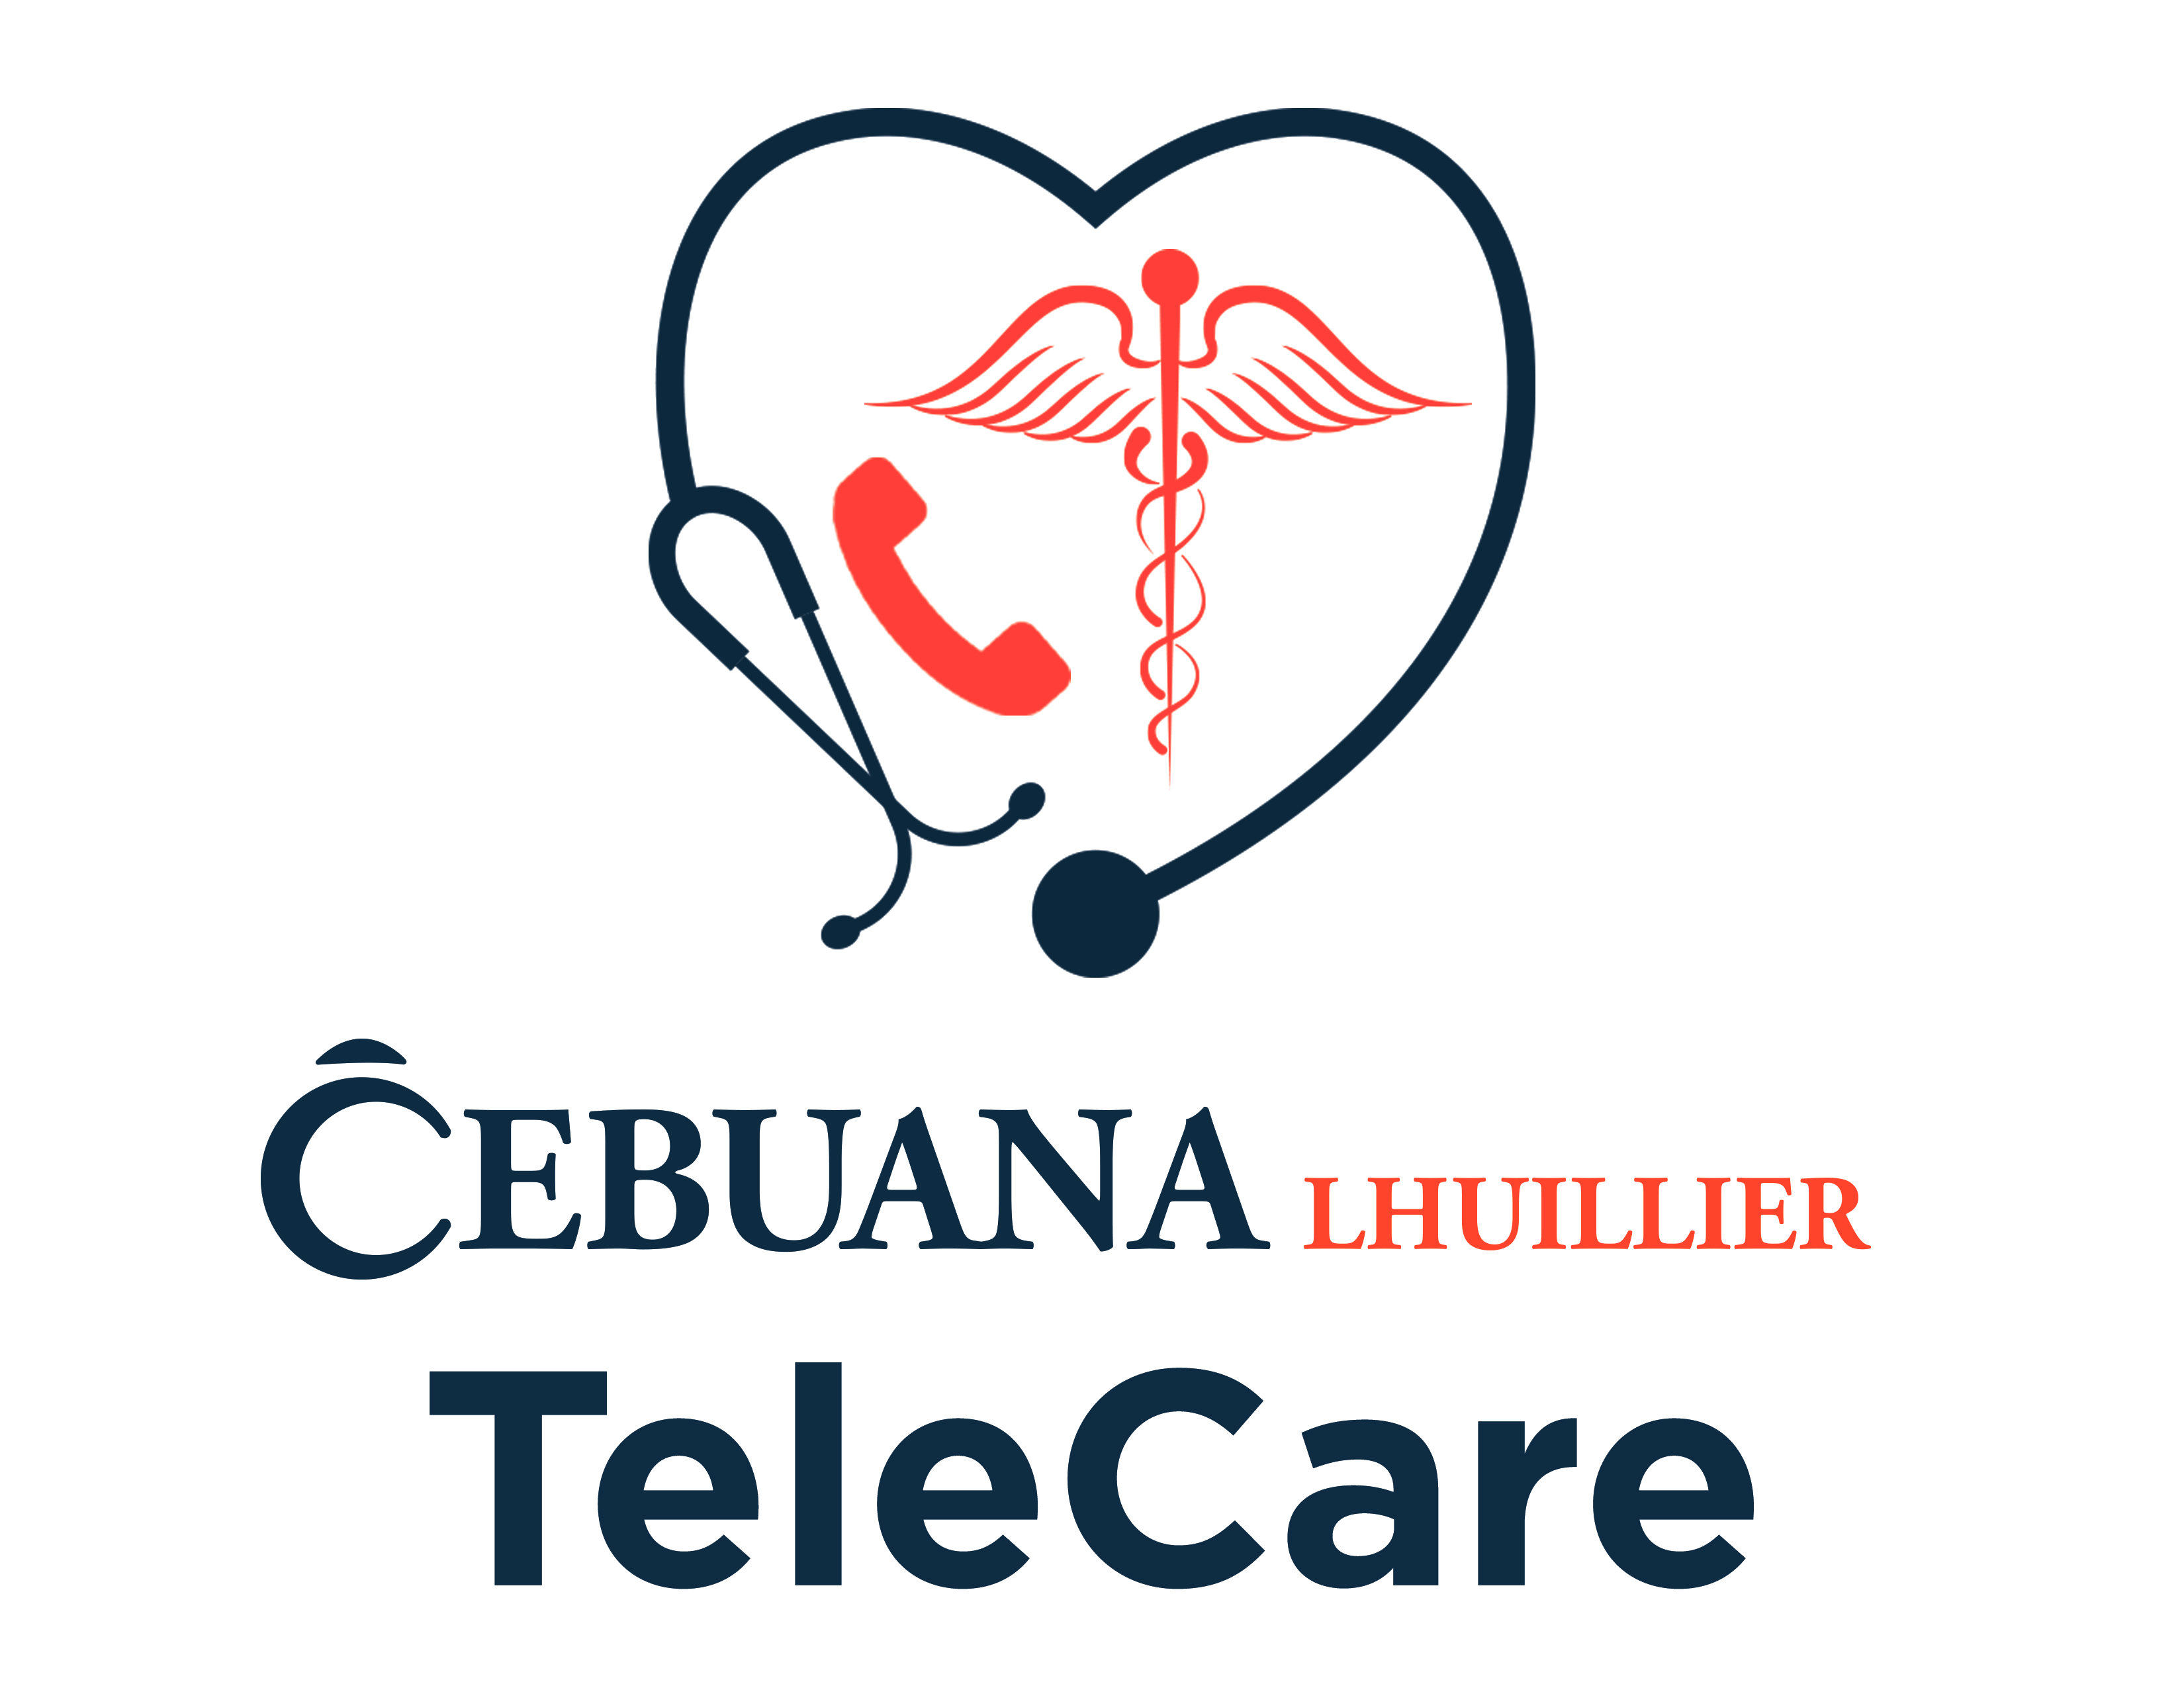 Cebuana Lhuillier | Cebuana Lhuillier TeleCare provides round-the-clock doctor consultation whenever, wherever.
                            The licensed doctors are available 24 hours a day, 7 days a week.Offers additional services like
                            E-Prescriptions, Online Issuance of Medical Certificates, and Referrals to Partner Specialist,
                            Medical Diagnostic Laboratories and Ambulance Service.